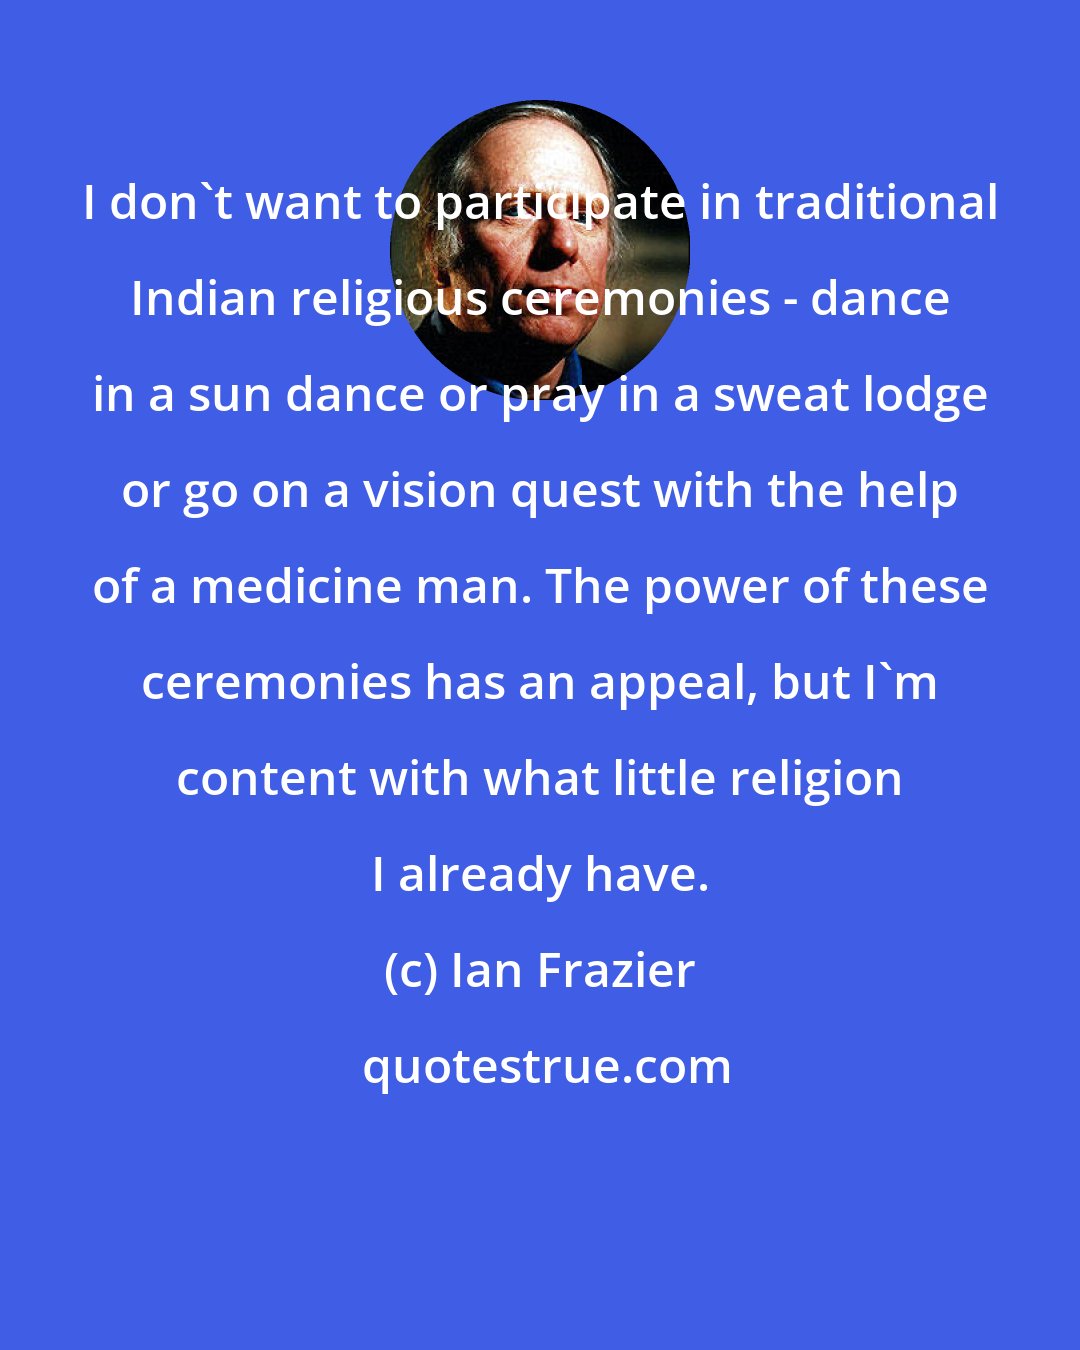 Ian Frazier: I don't want to participate in traditional Indian religious ceremonies - dance in a sun dance or pray in a sweat lodge or go on a vision quest with the help of a medicine man. The power of these ceremonies has an appeal, but I'm content with what little religion I already have.